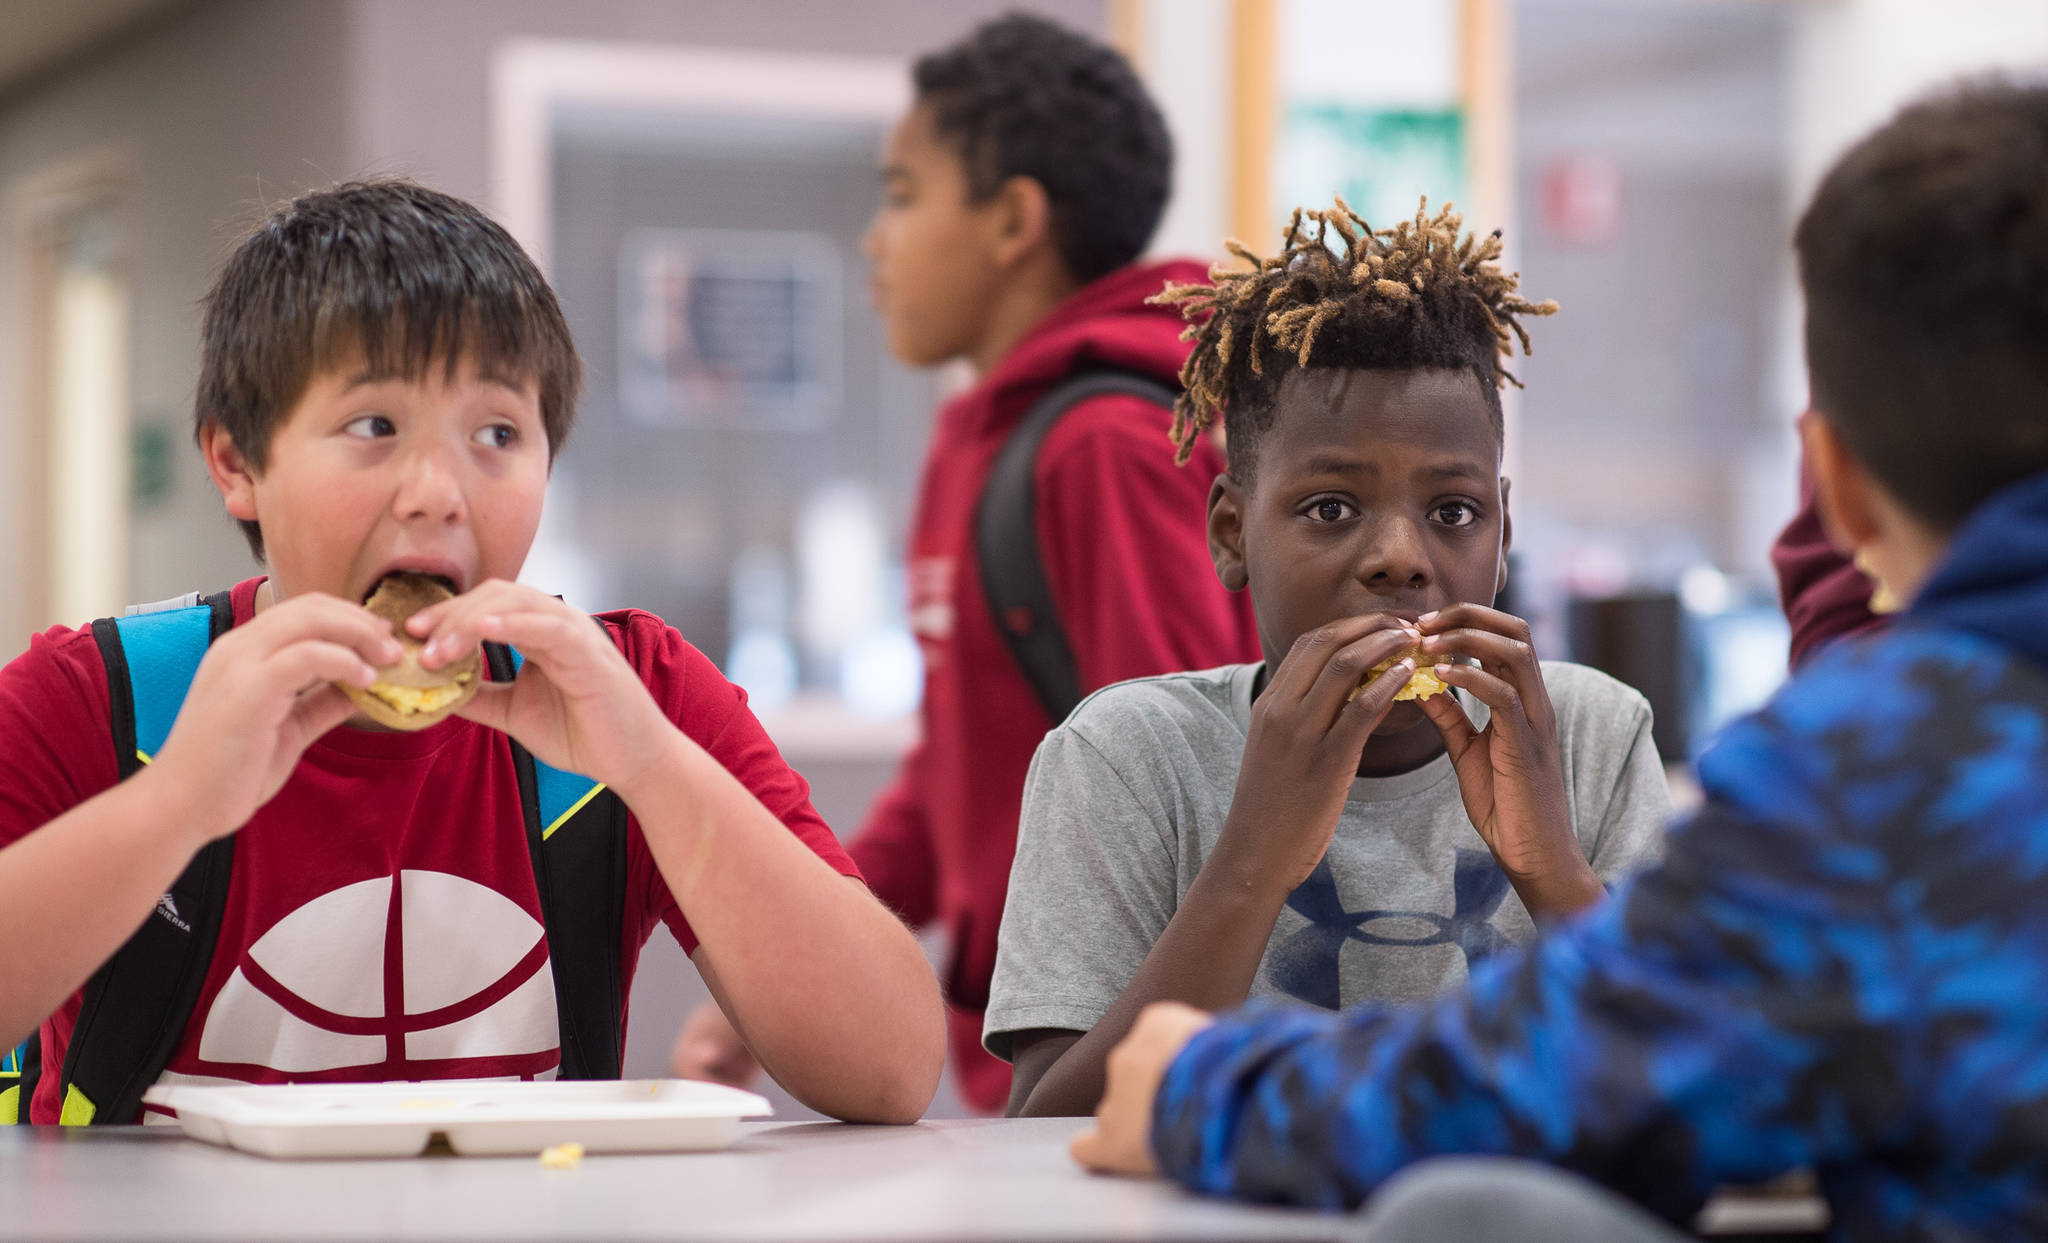 Kahyl Dybdahl, left, and Bronze Chevis eat an egg sandwich breakfast before school at Dzantik’i Heeni Middle School on Wednesday, Sept. 6, 2017. The Juneau Community Foundation presented a check for $24,300 to Juneau School District for in-school food programs on Wednesday, Sept. 6, 2017. (Michael Penn | Juneau Empire)